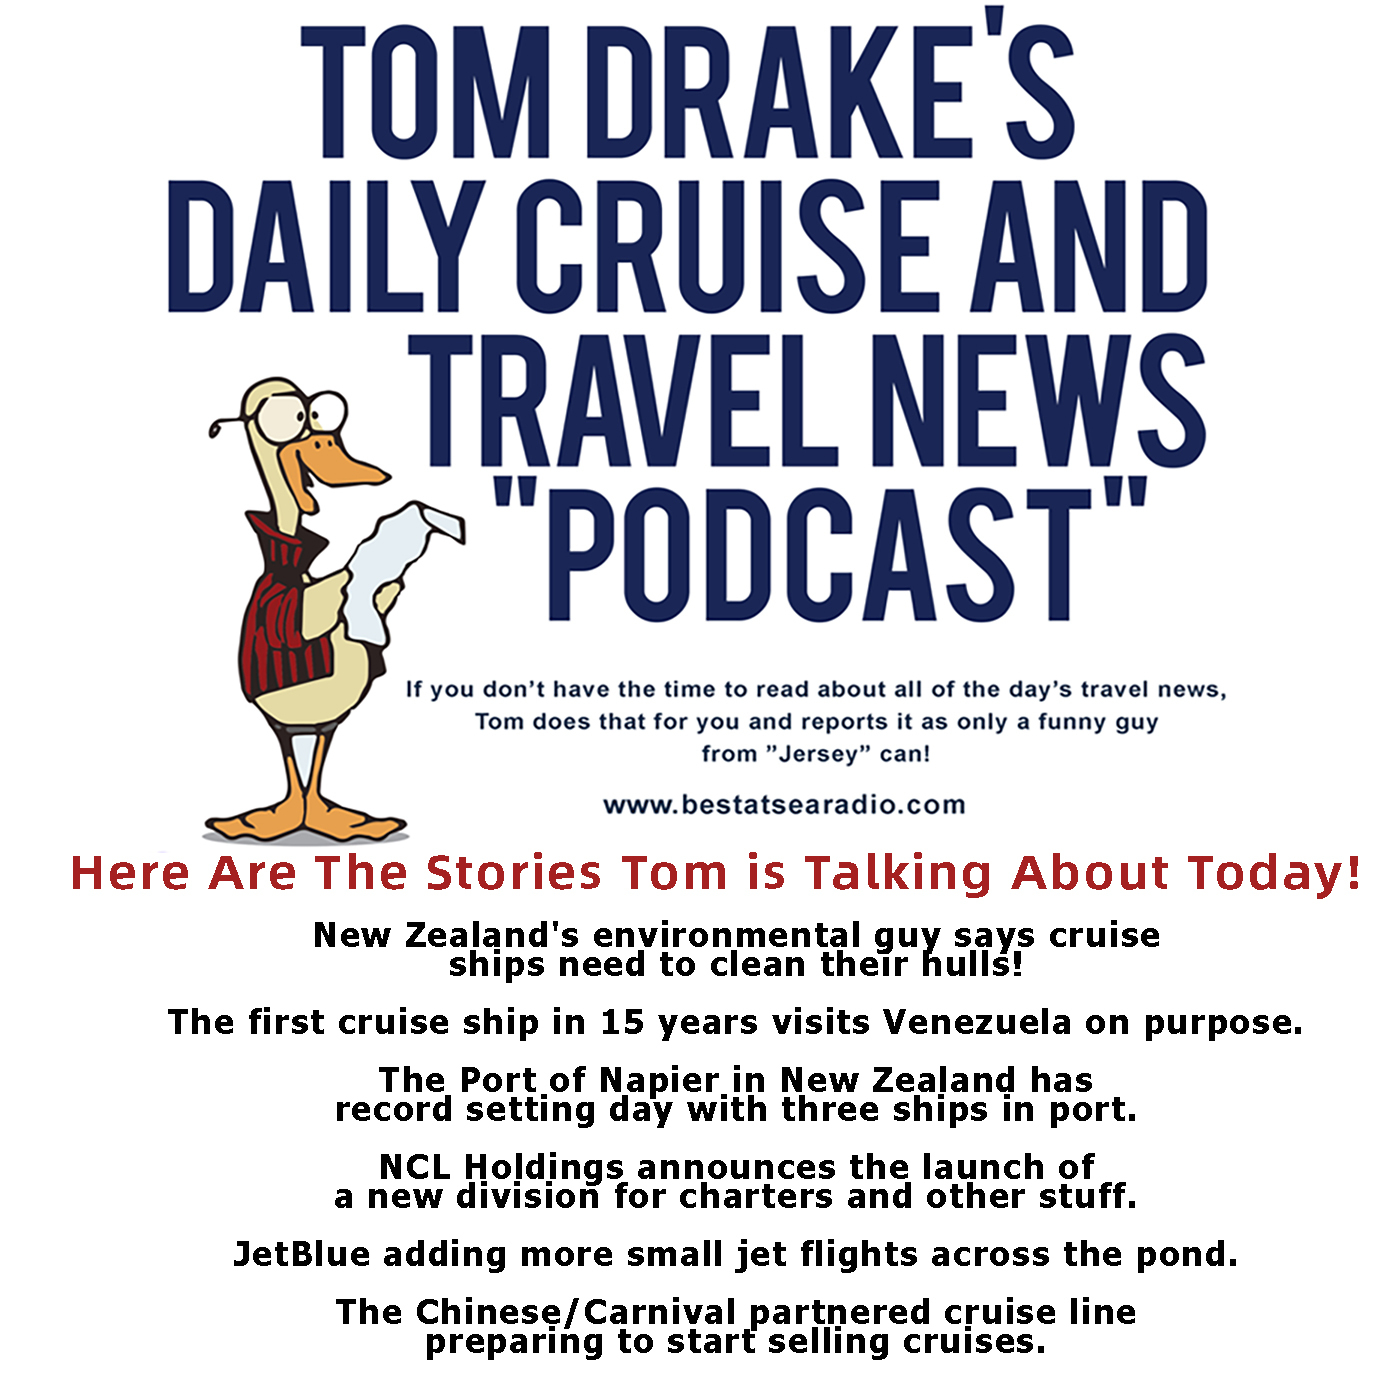 Tom Drake's Daily Cruise and Travel News "Podcast" for Saturday, January 7, 2023